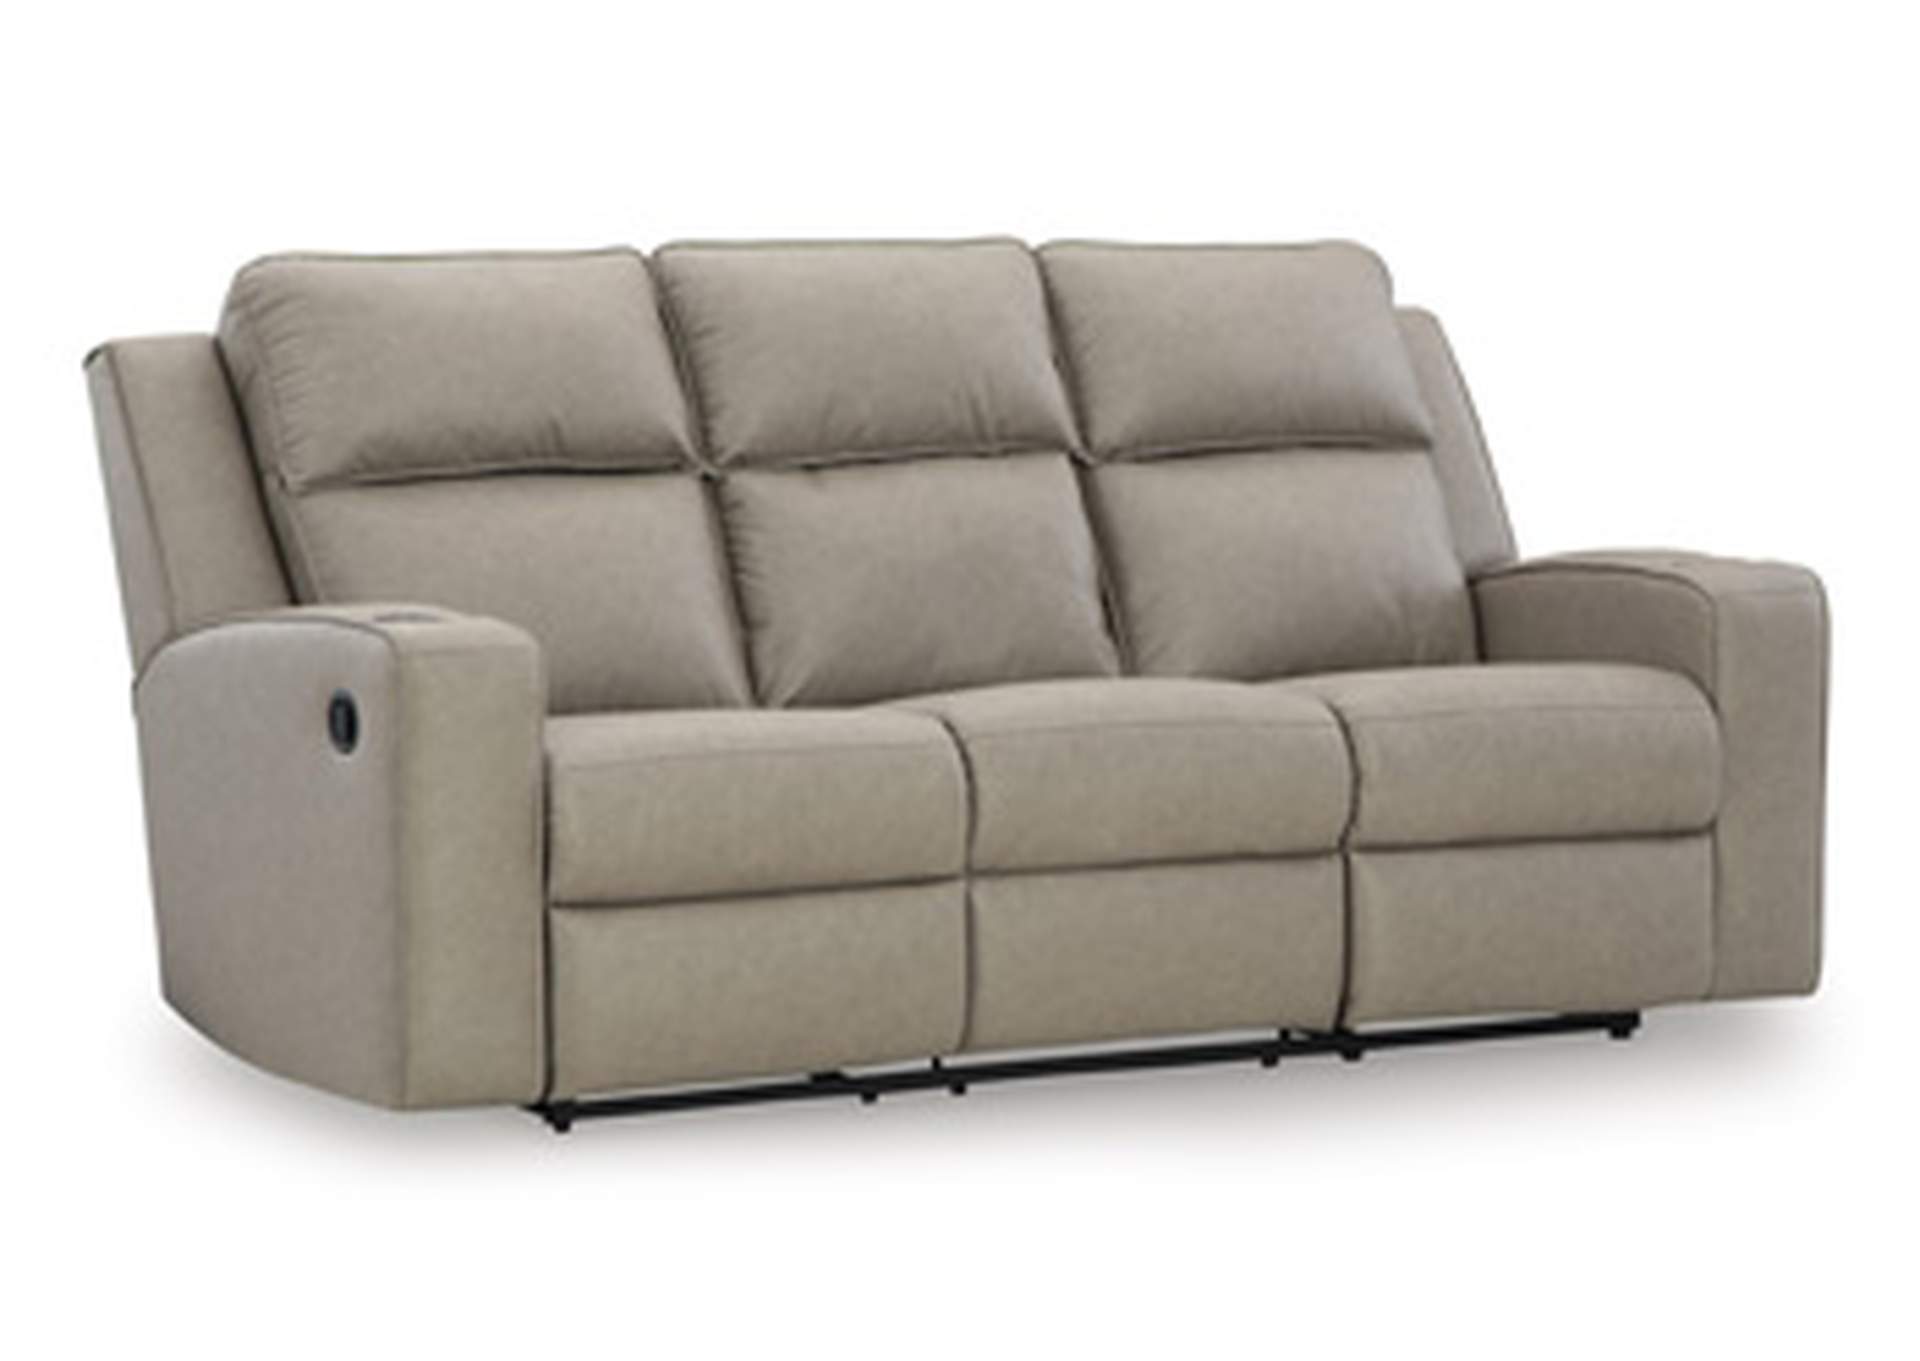 Lavenhorne Reclining Sofa with Drop Down Table,Signature Design By Ashley